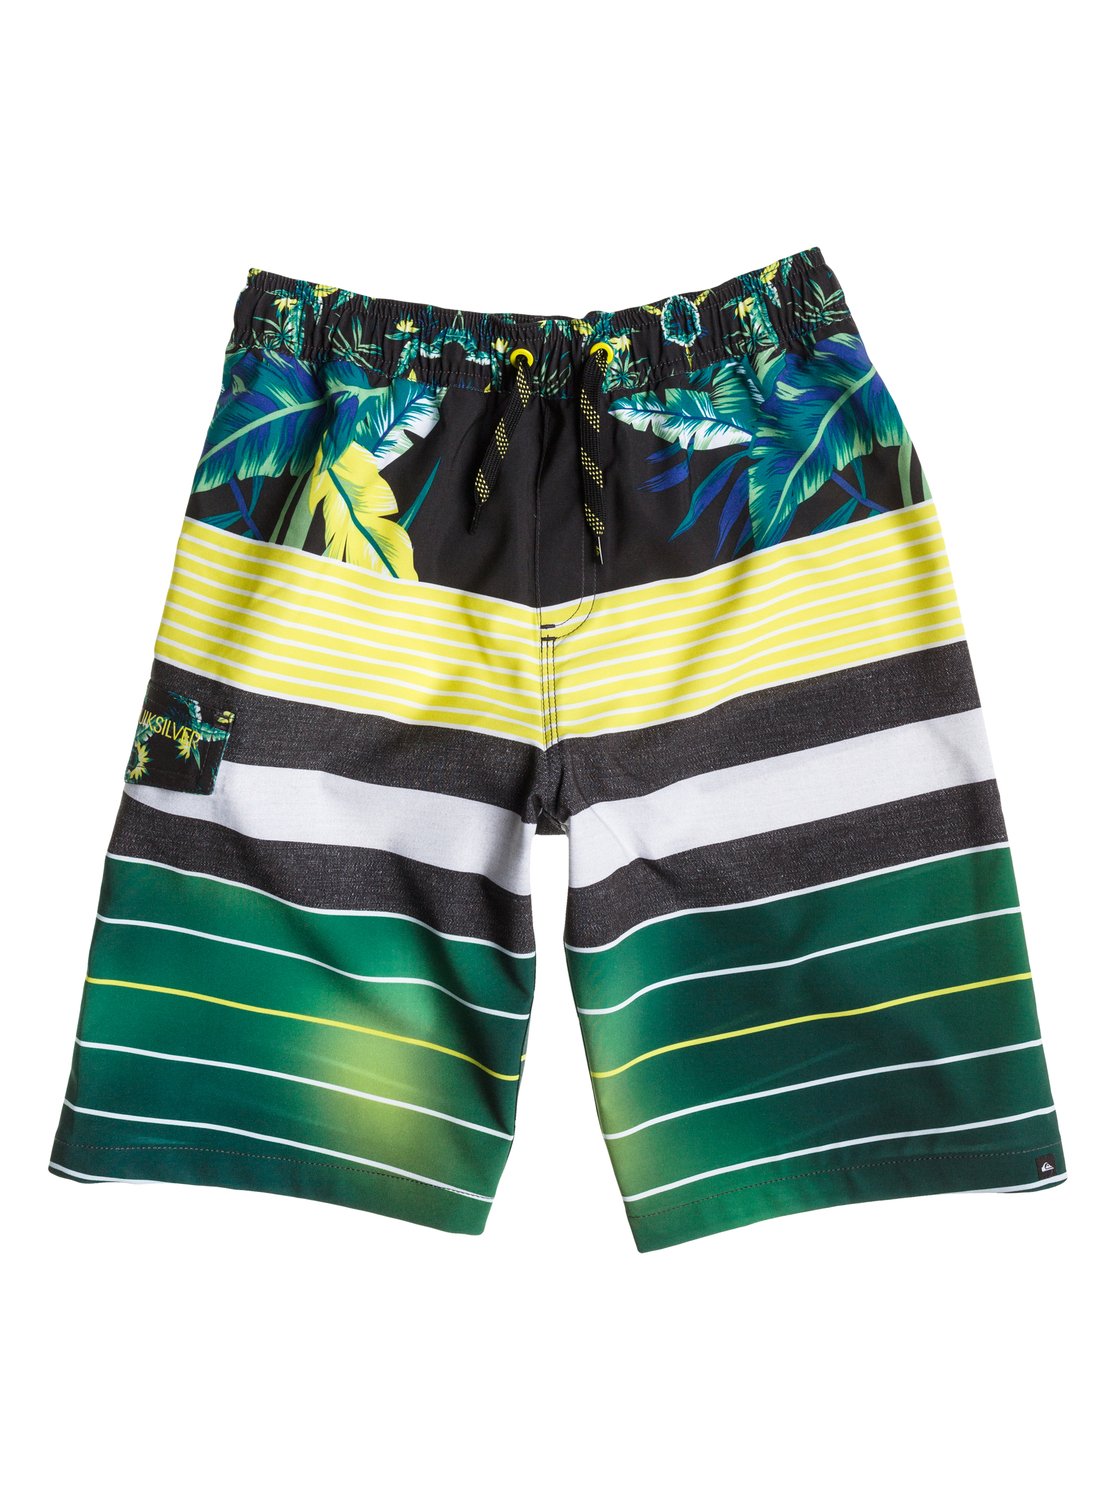 Yg Remix Vl Youth 19 - Quiksilver - Quiksilver     Quiksilver -     2015. :   4-way Stretch      ,  ,  48.3    .<br>